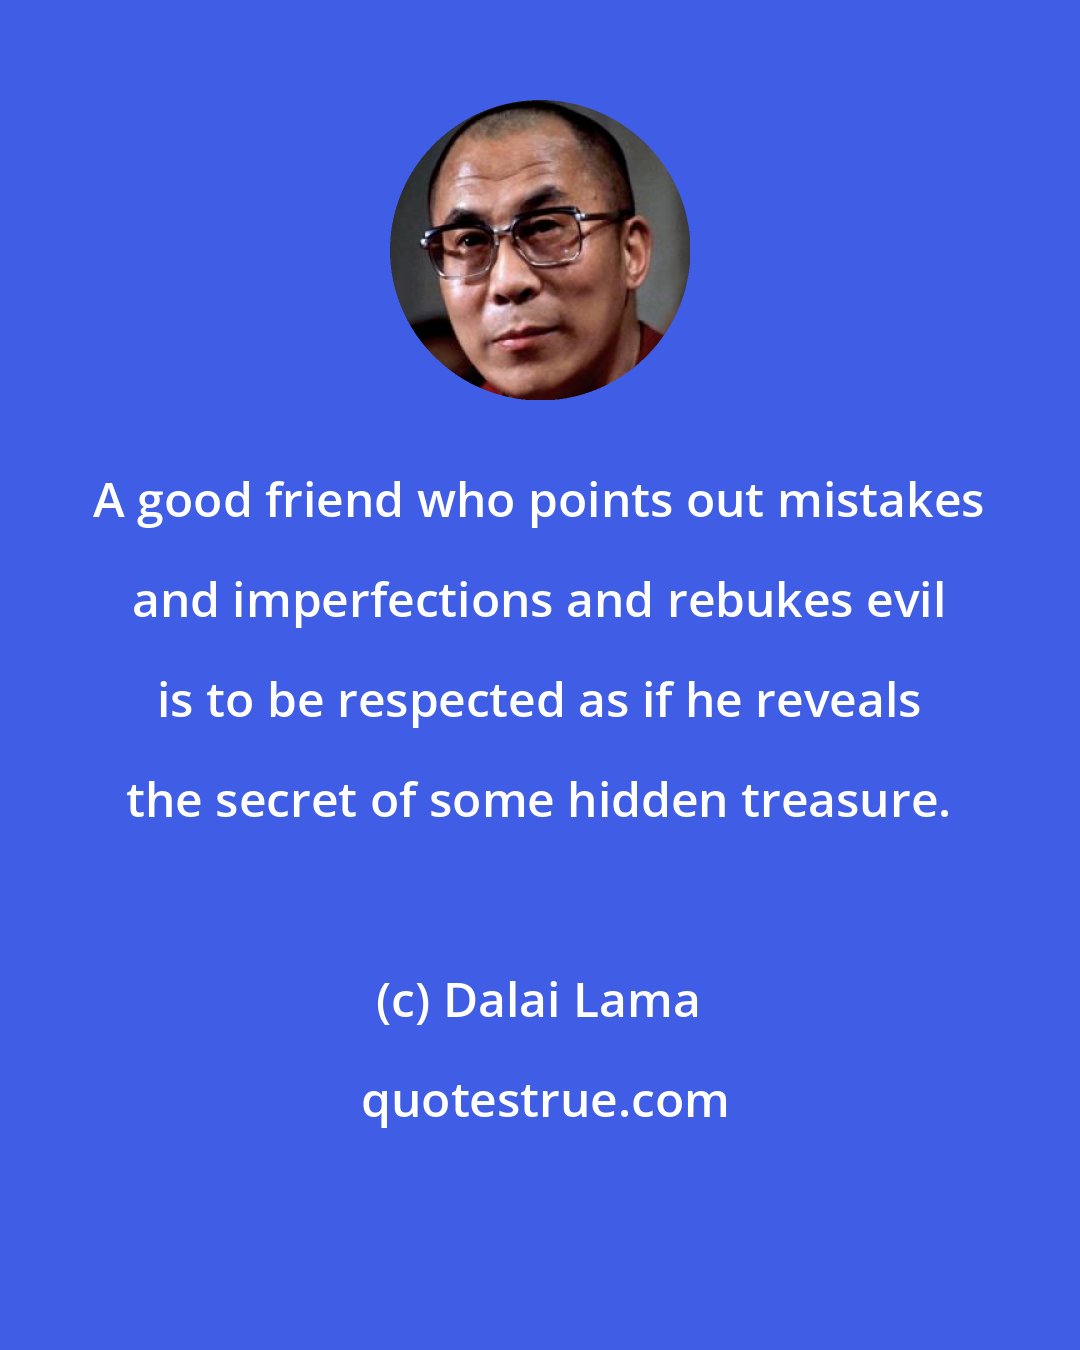 Dalai Lama: A good friend who points out mistakes and imperfections and rebukes evil is to be respected as if he reveals the secret of some hidden treasure.